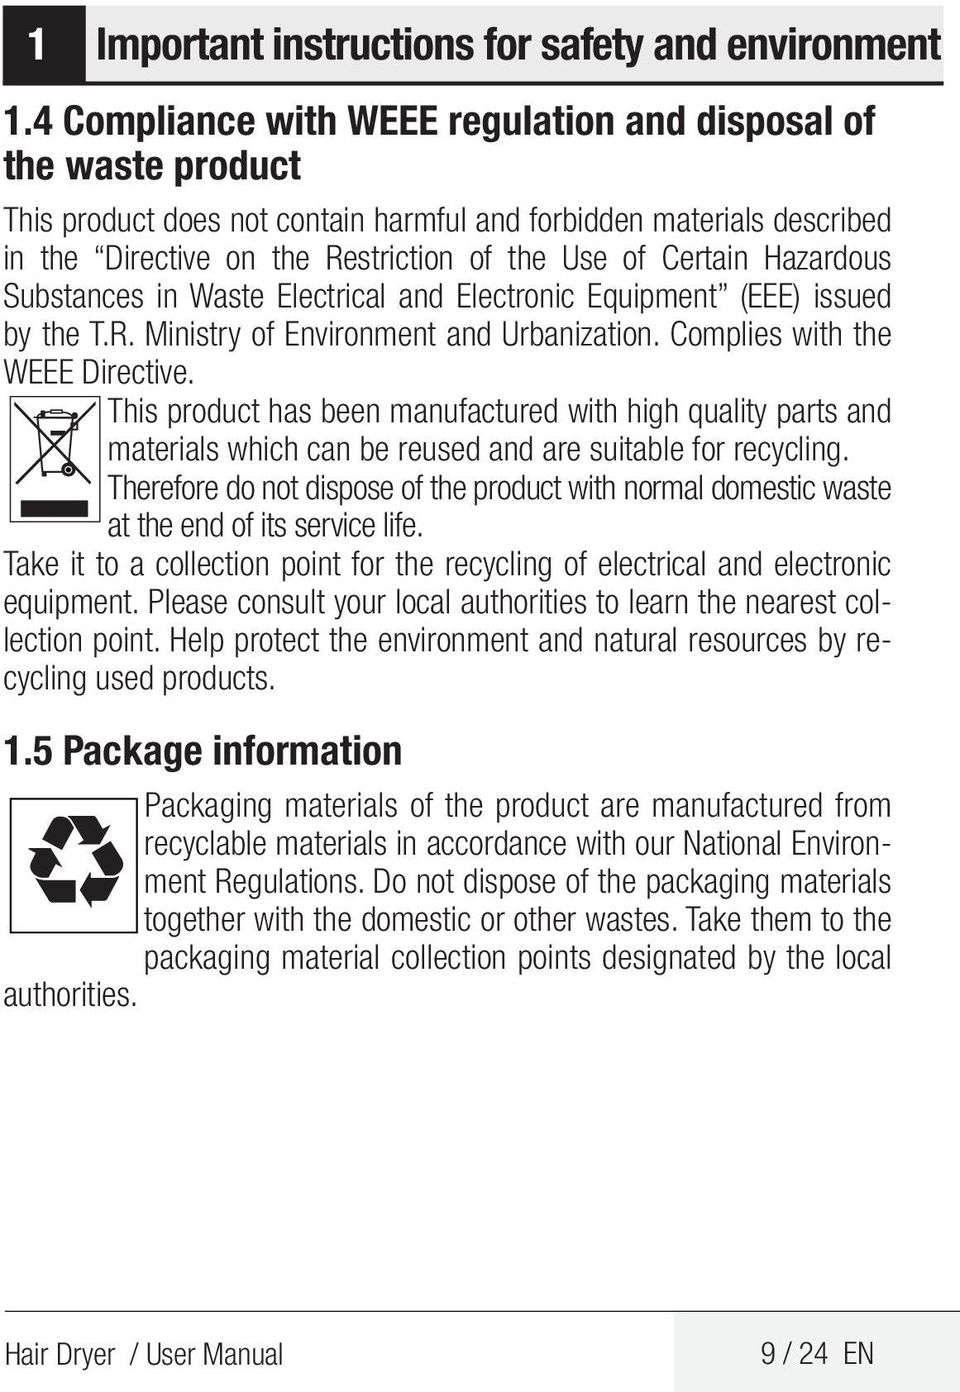 Hazardous Substances in Waste Electrical and Electronic Equipment (EEE) issued by the T.R. Ministry of Environment and Urbanization. Complies with the WEEE Directive.